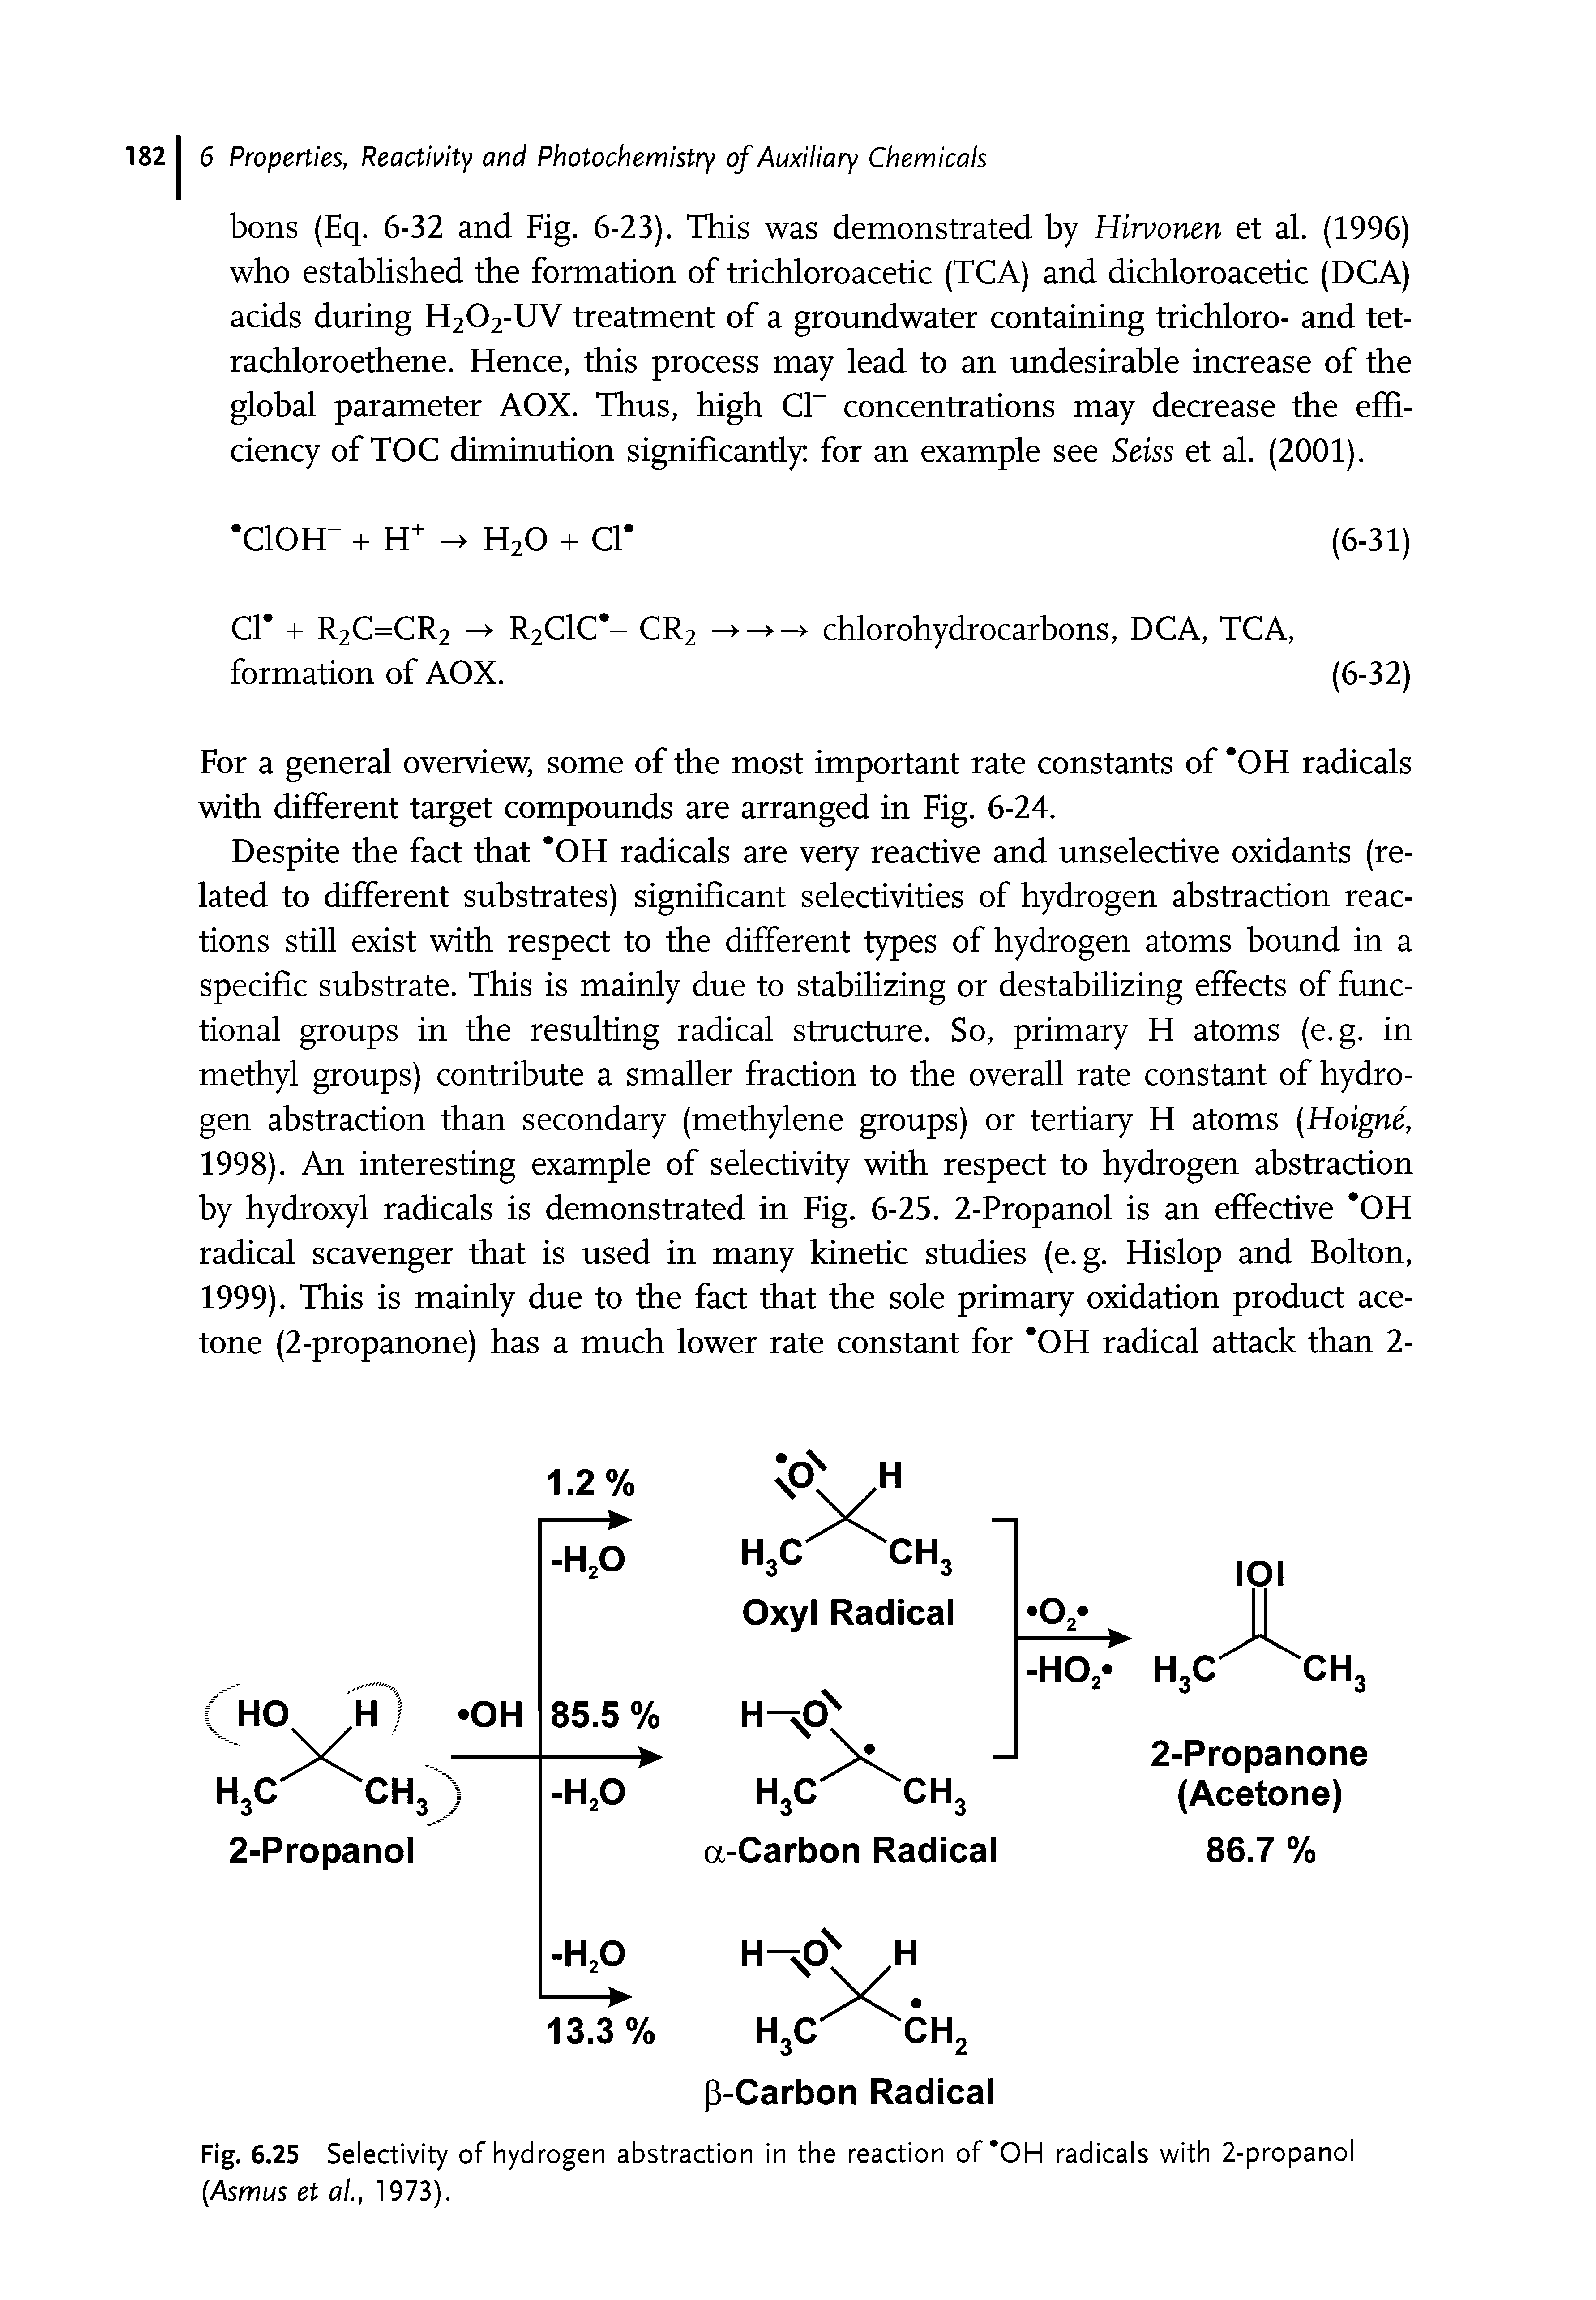 Fig. 6.25 Selectivity of hydrogen abstraction in the reaction of OH radicals with 2-propanol Asmus et al., 1973).